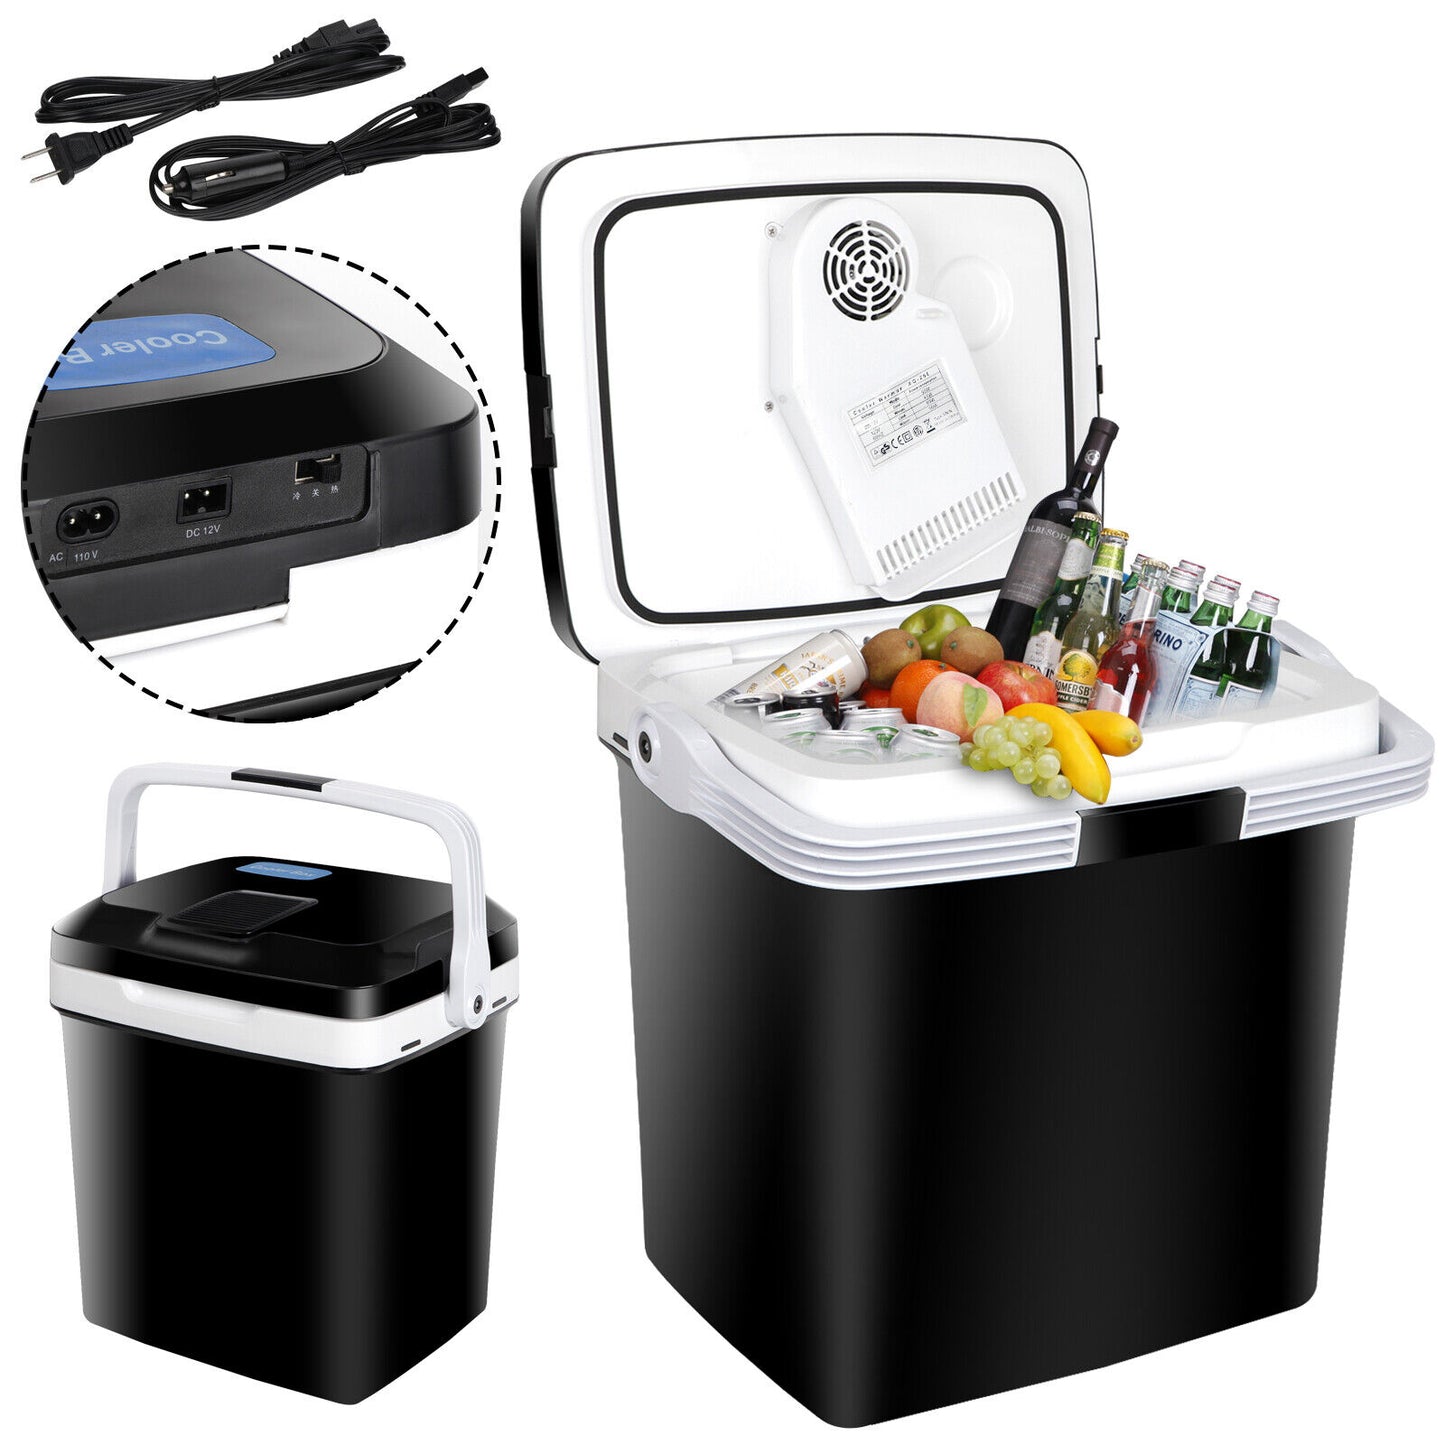 12V Portable Car Iceless Thermoelectric Cooler&Warmer Truck Freezer Food Drinks